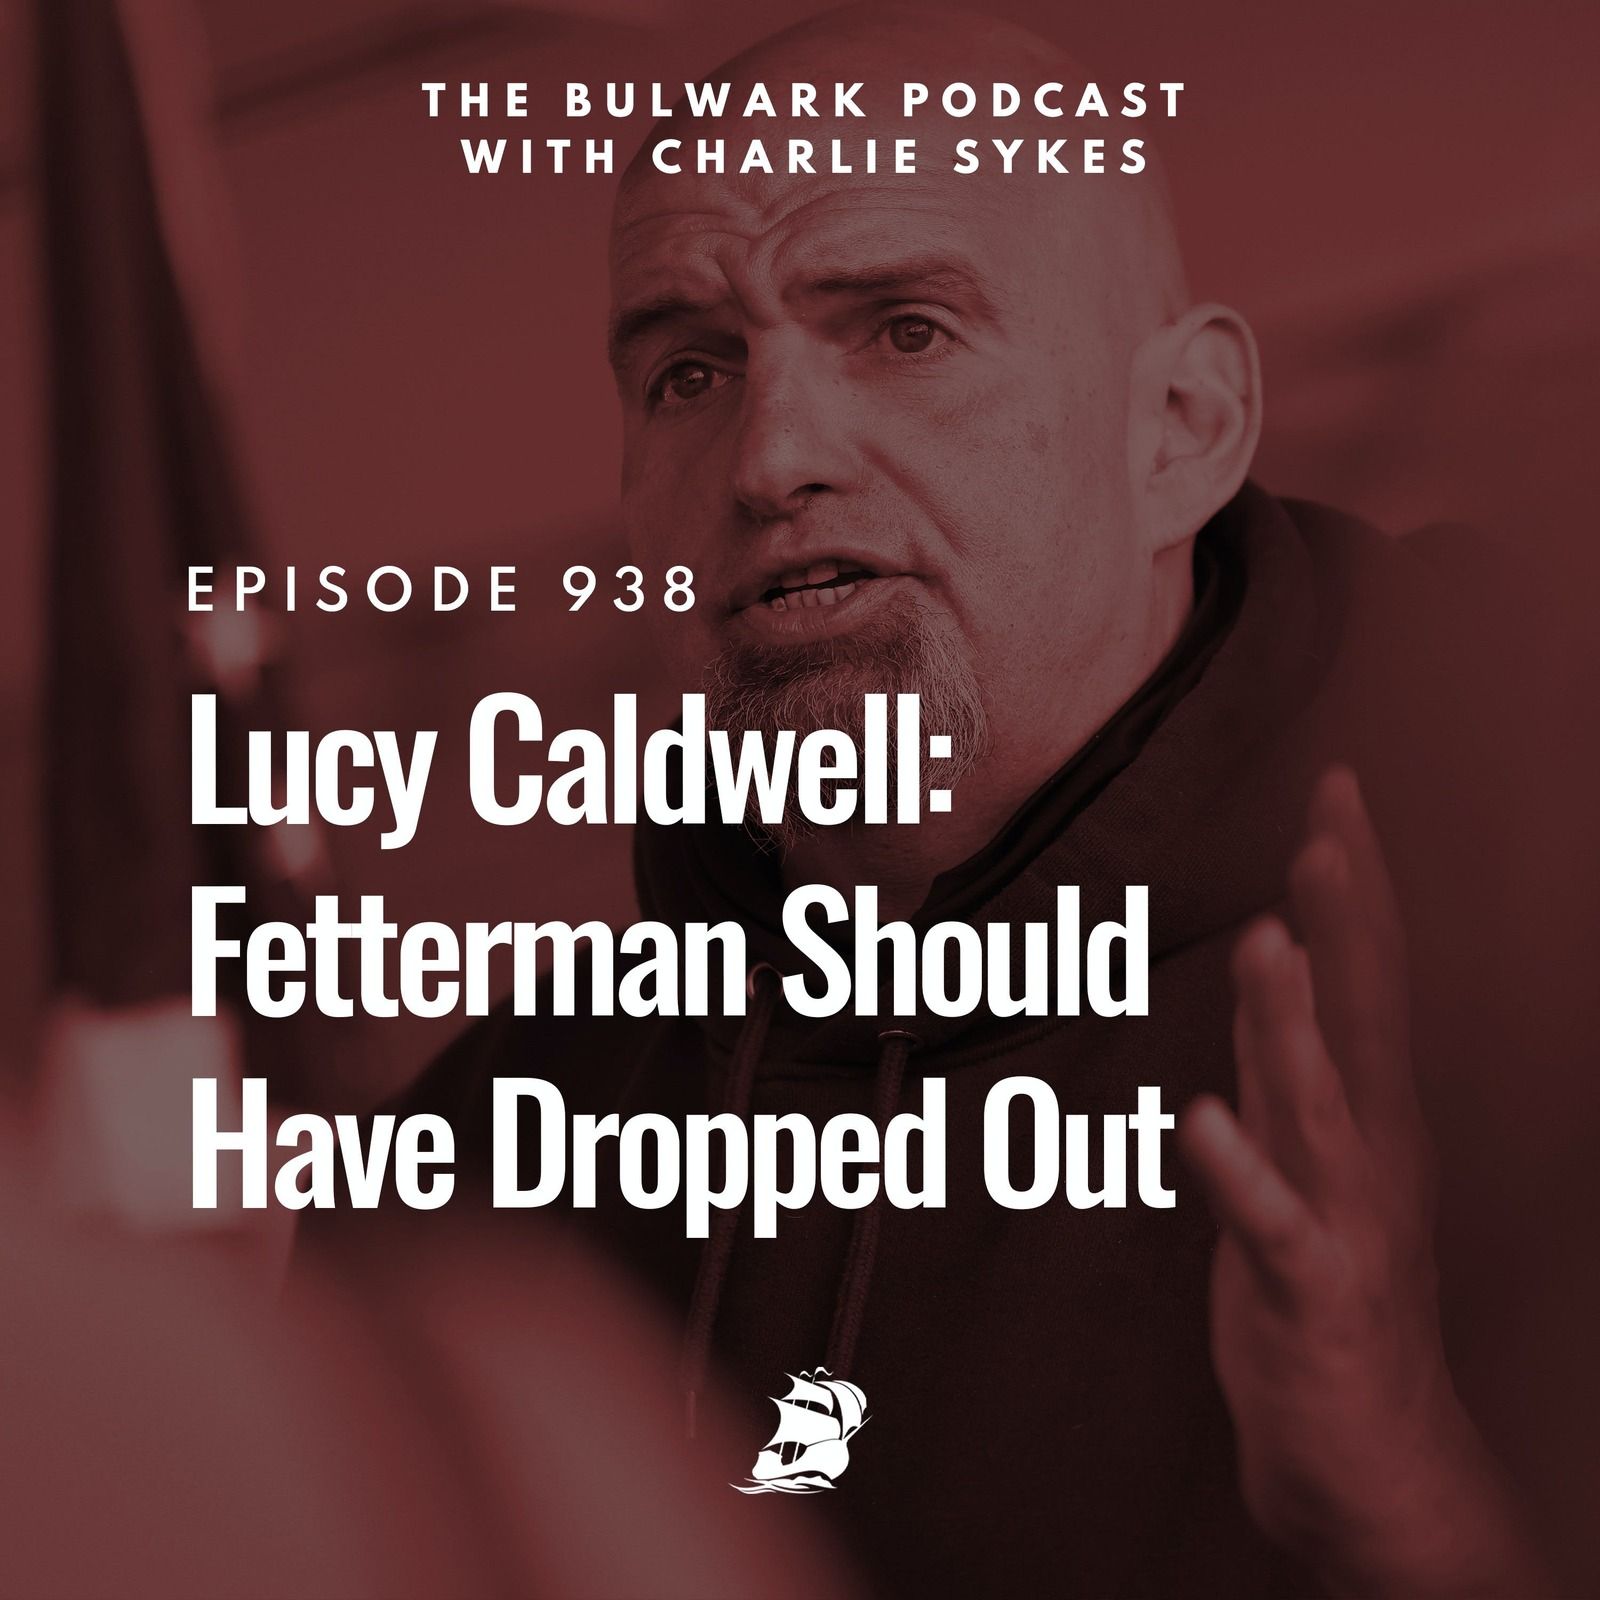 Lucy Caldwell: Fetterman Should Have Dropped Out